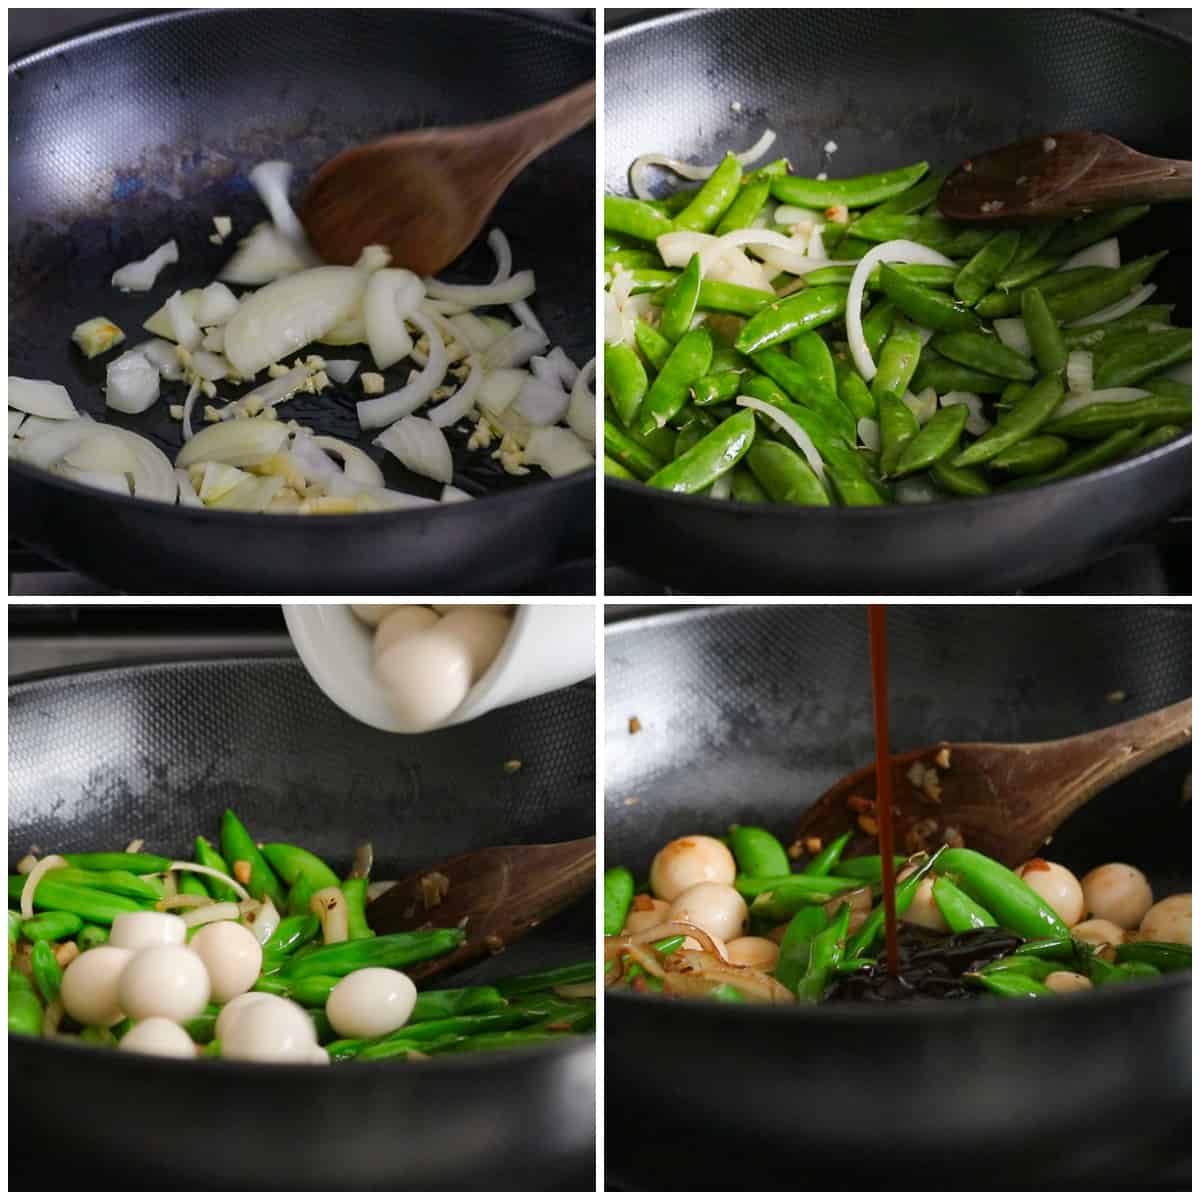 The step by step process for making the sugar snap peas stir fry.